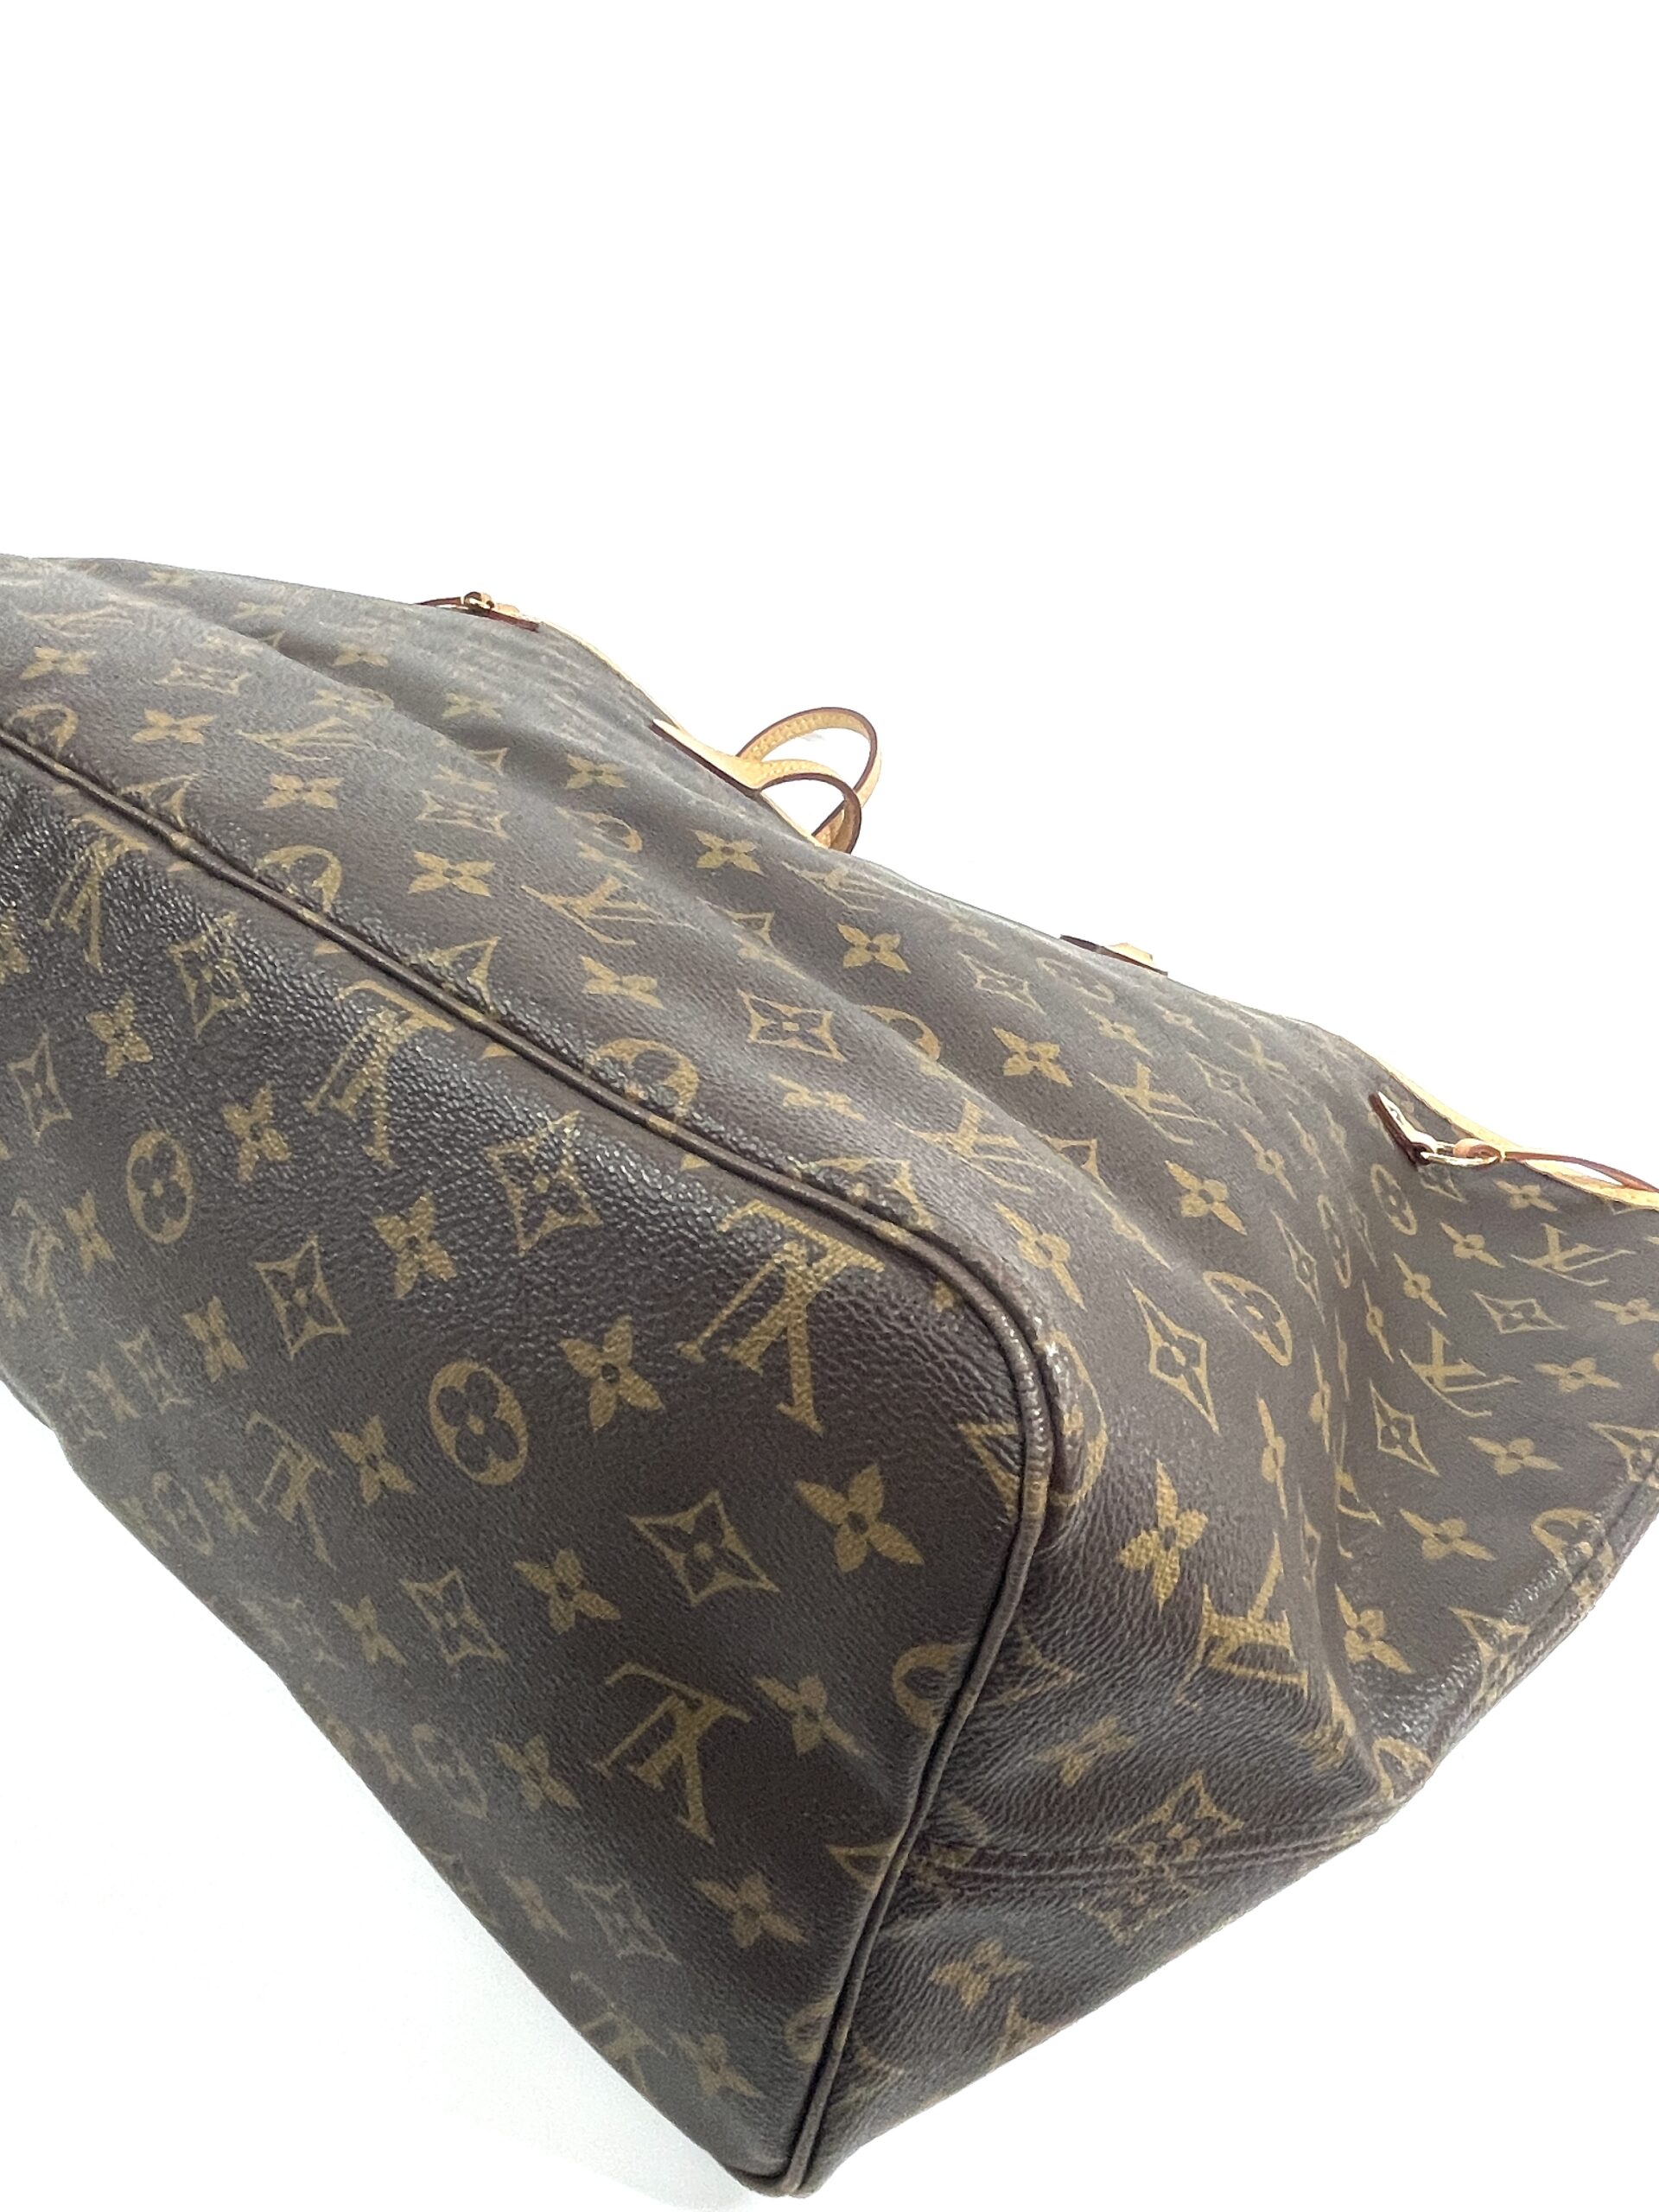 Louis Vuitton Neverfull GM M40157 Monogram Canvas Tote. With small